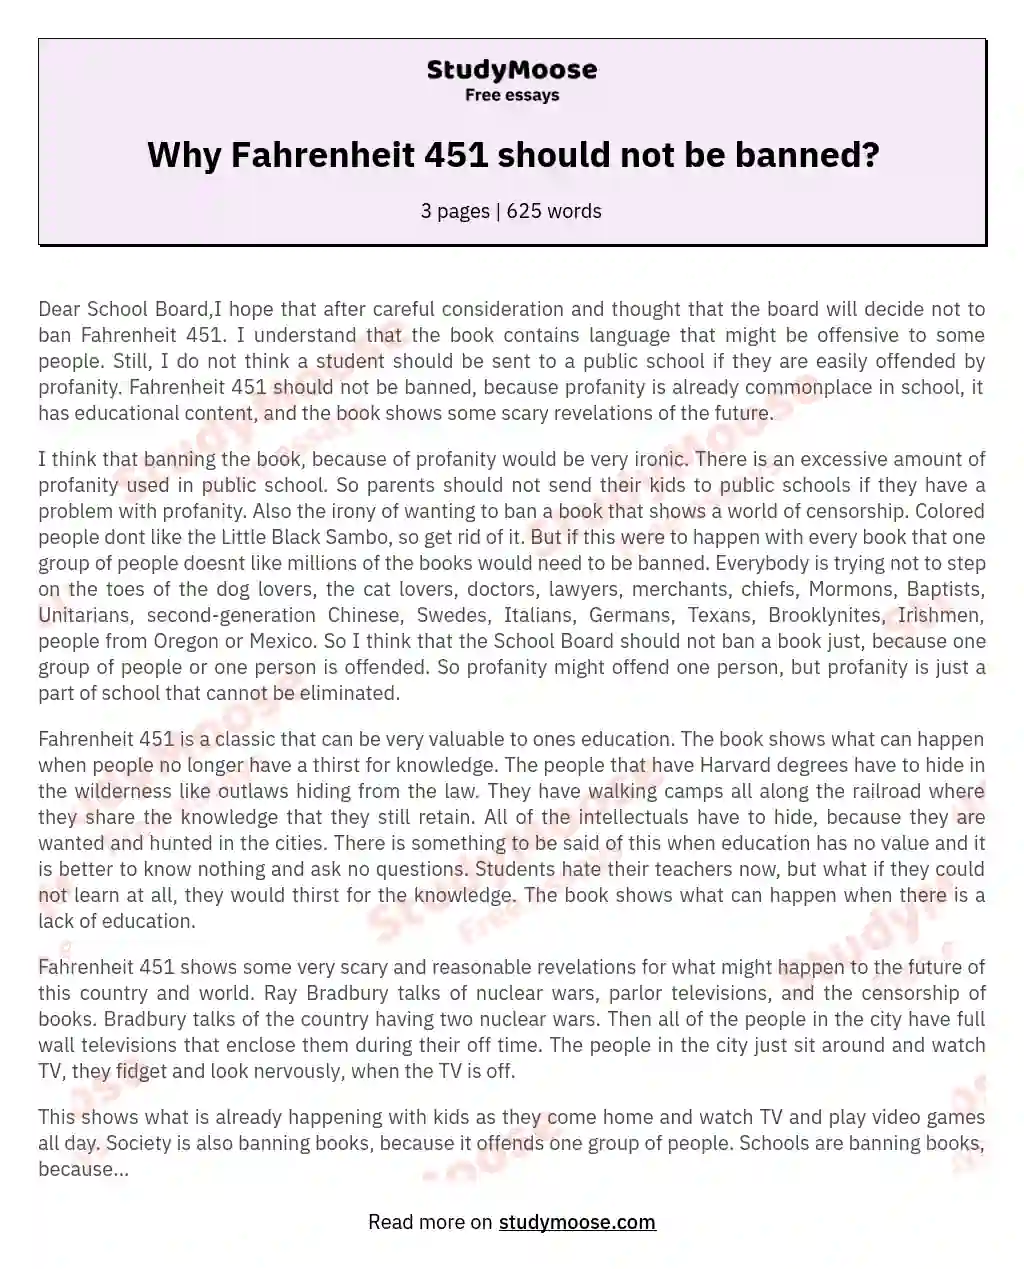 Why Fahrenheit 451 should not be banned?